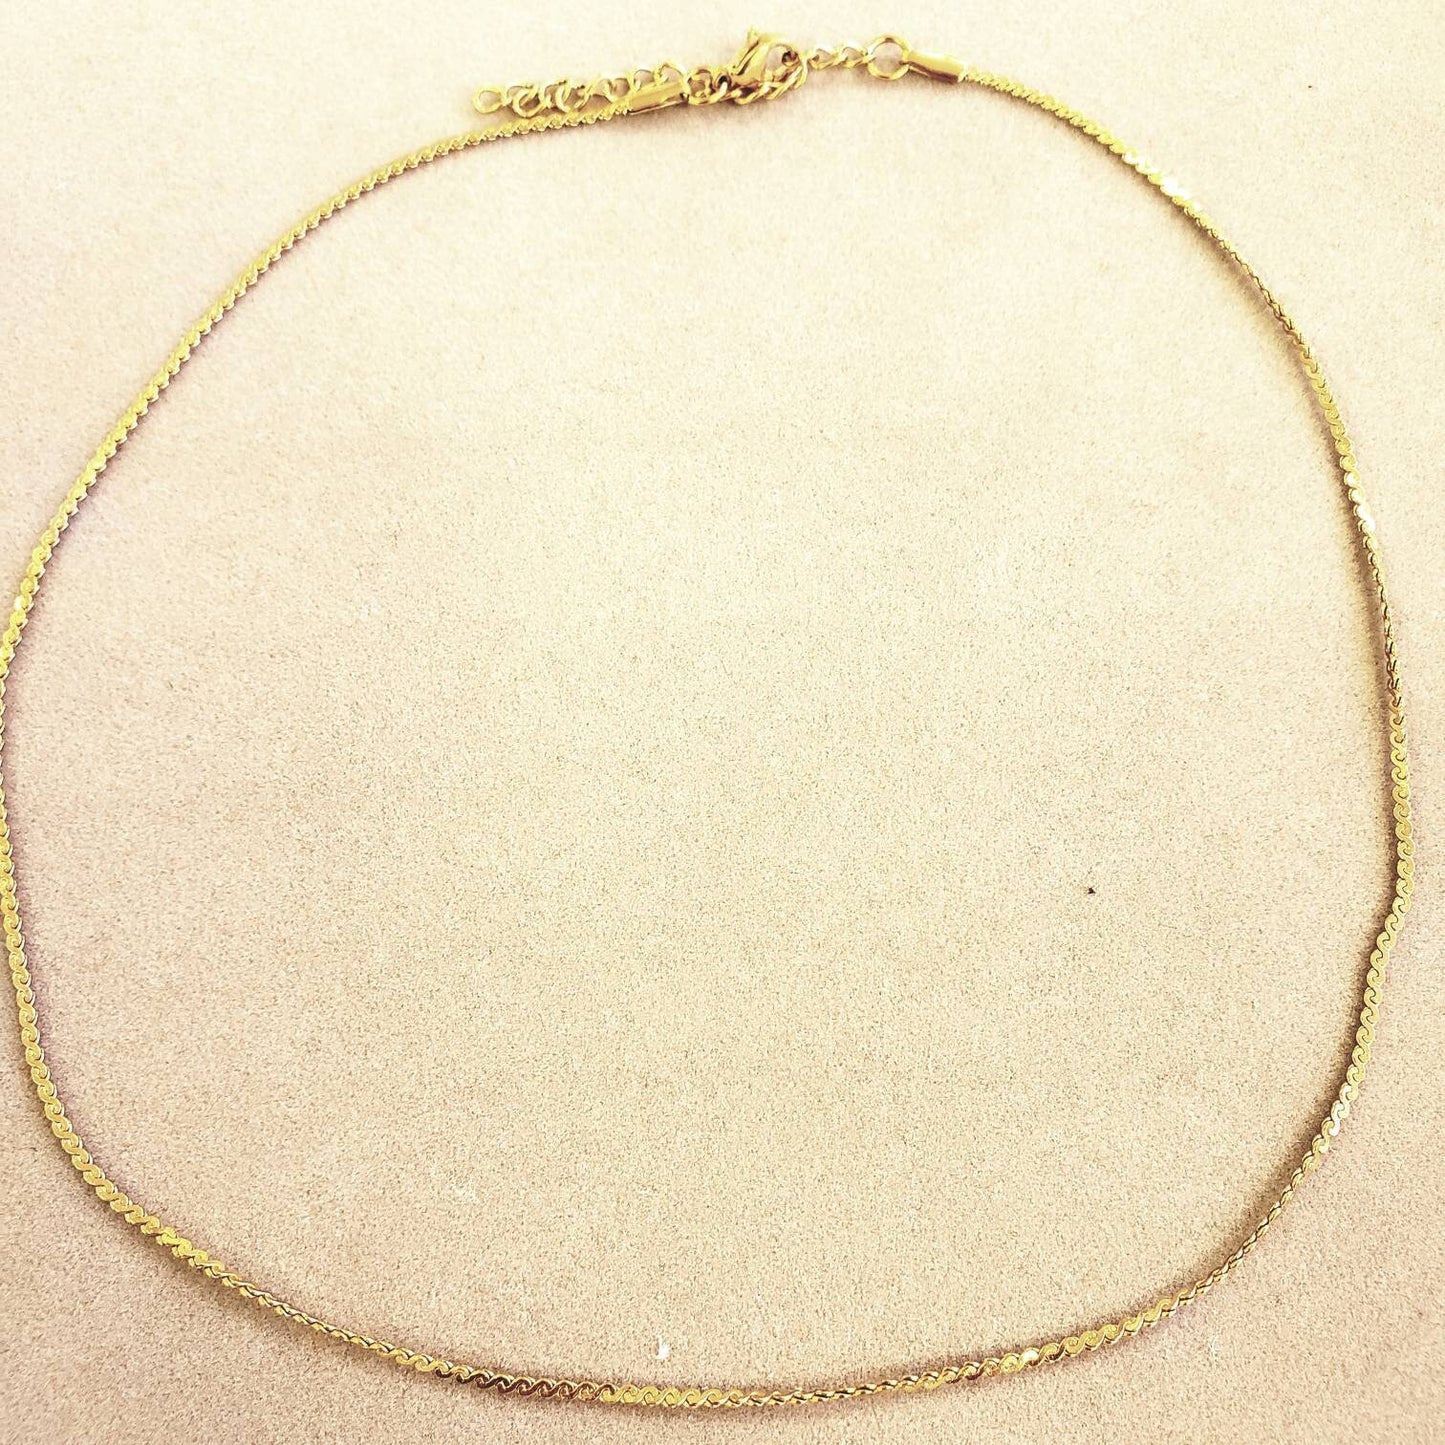 Flat chain necklace with extender,  skinny herringbone like chain, layering chain, lays flat